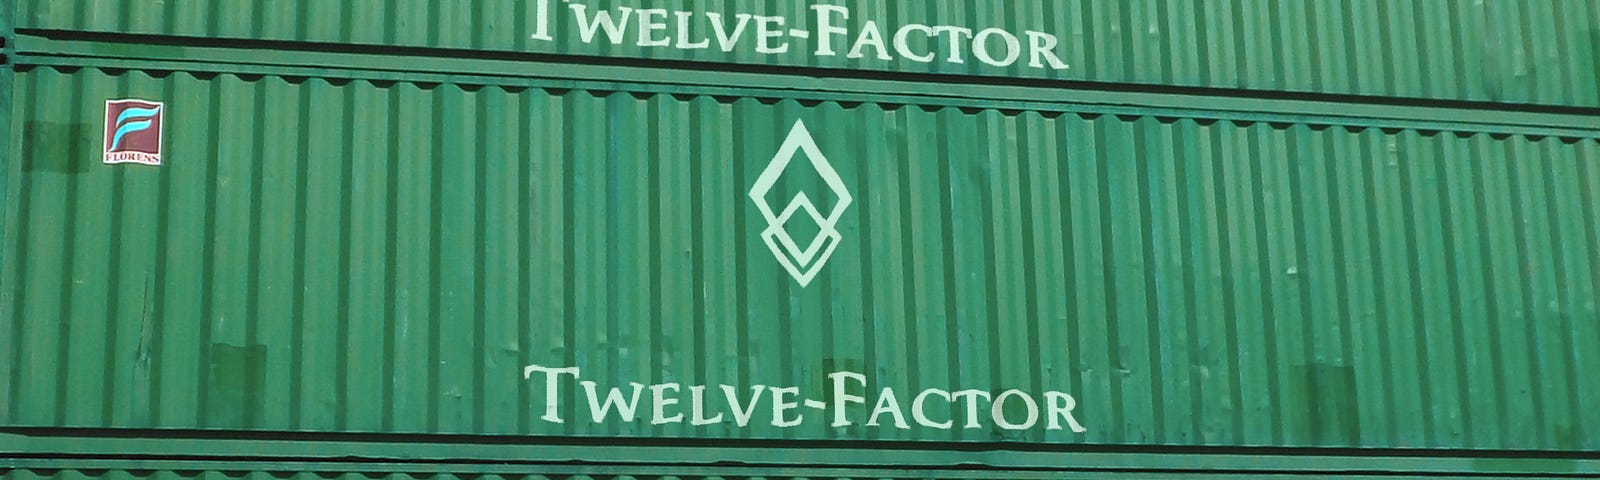 Shipping containers labelled “Twelve-Factor”